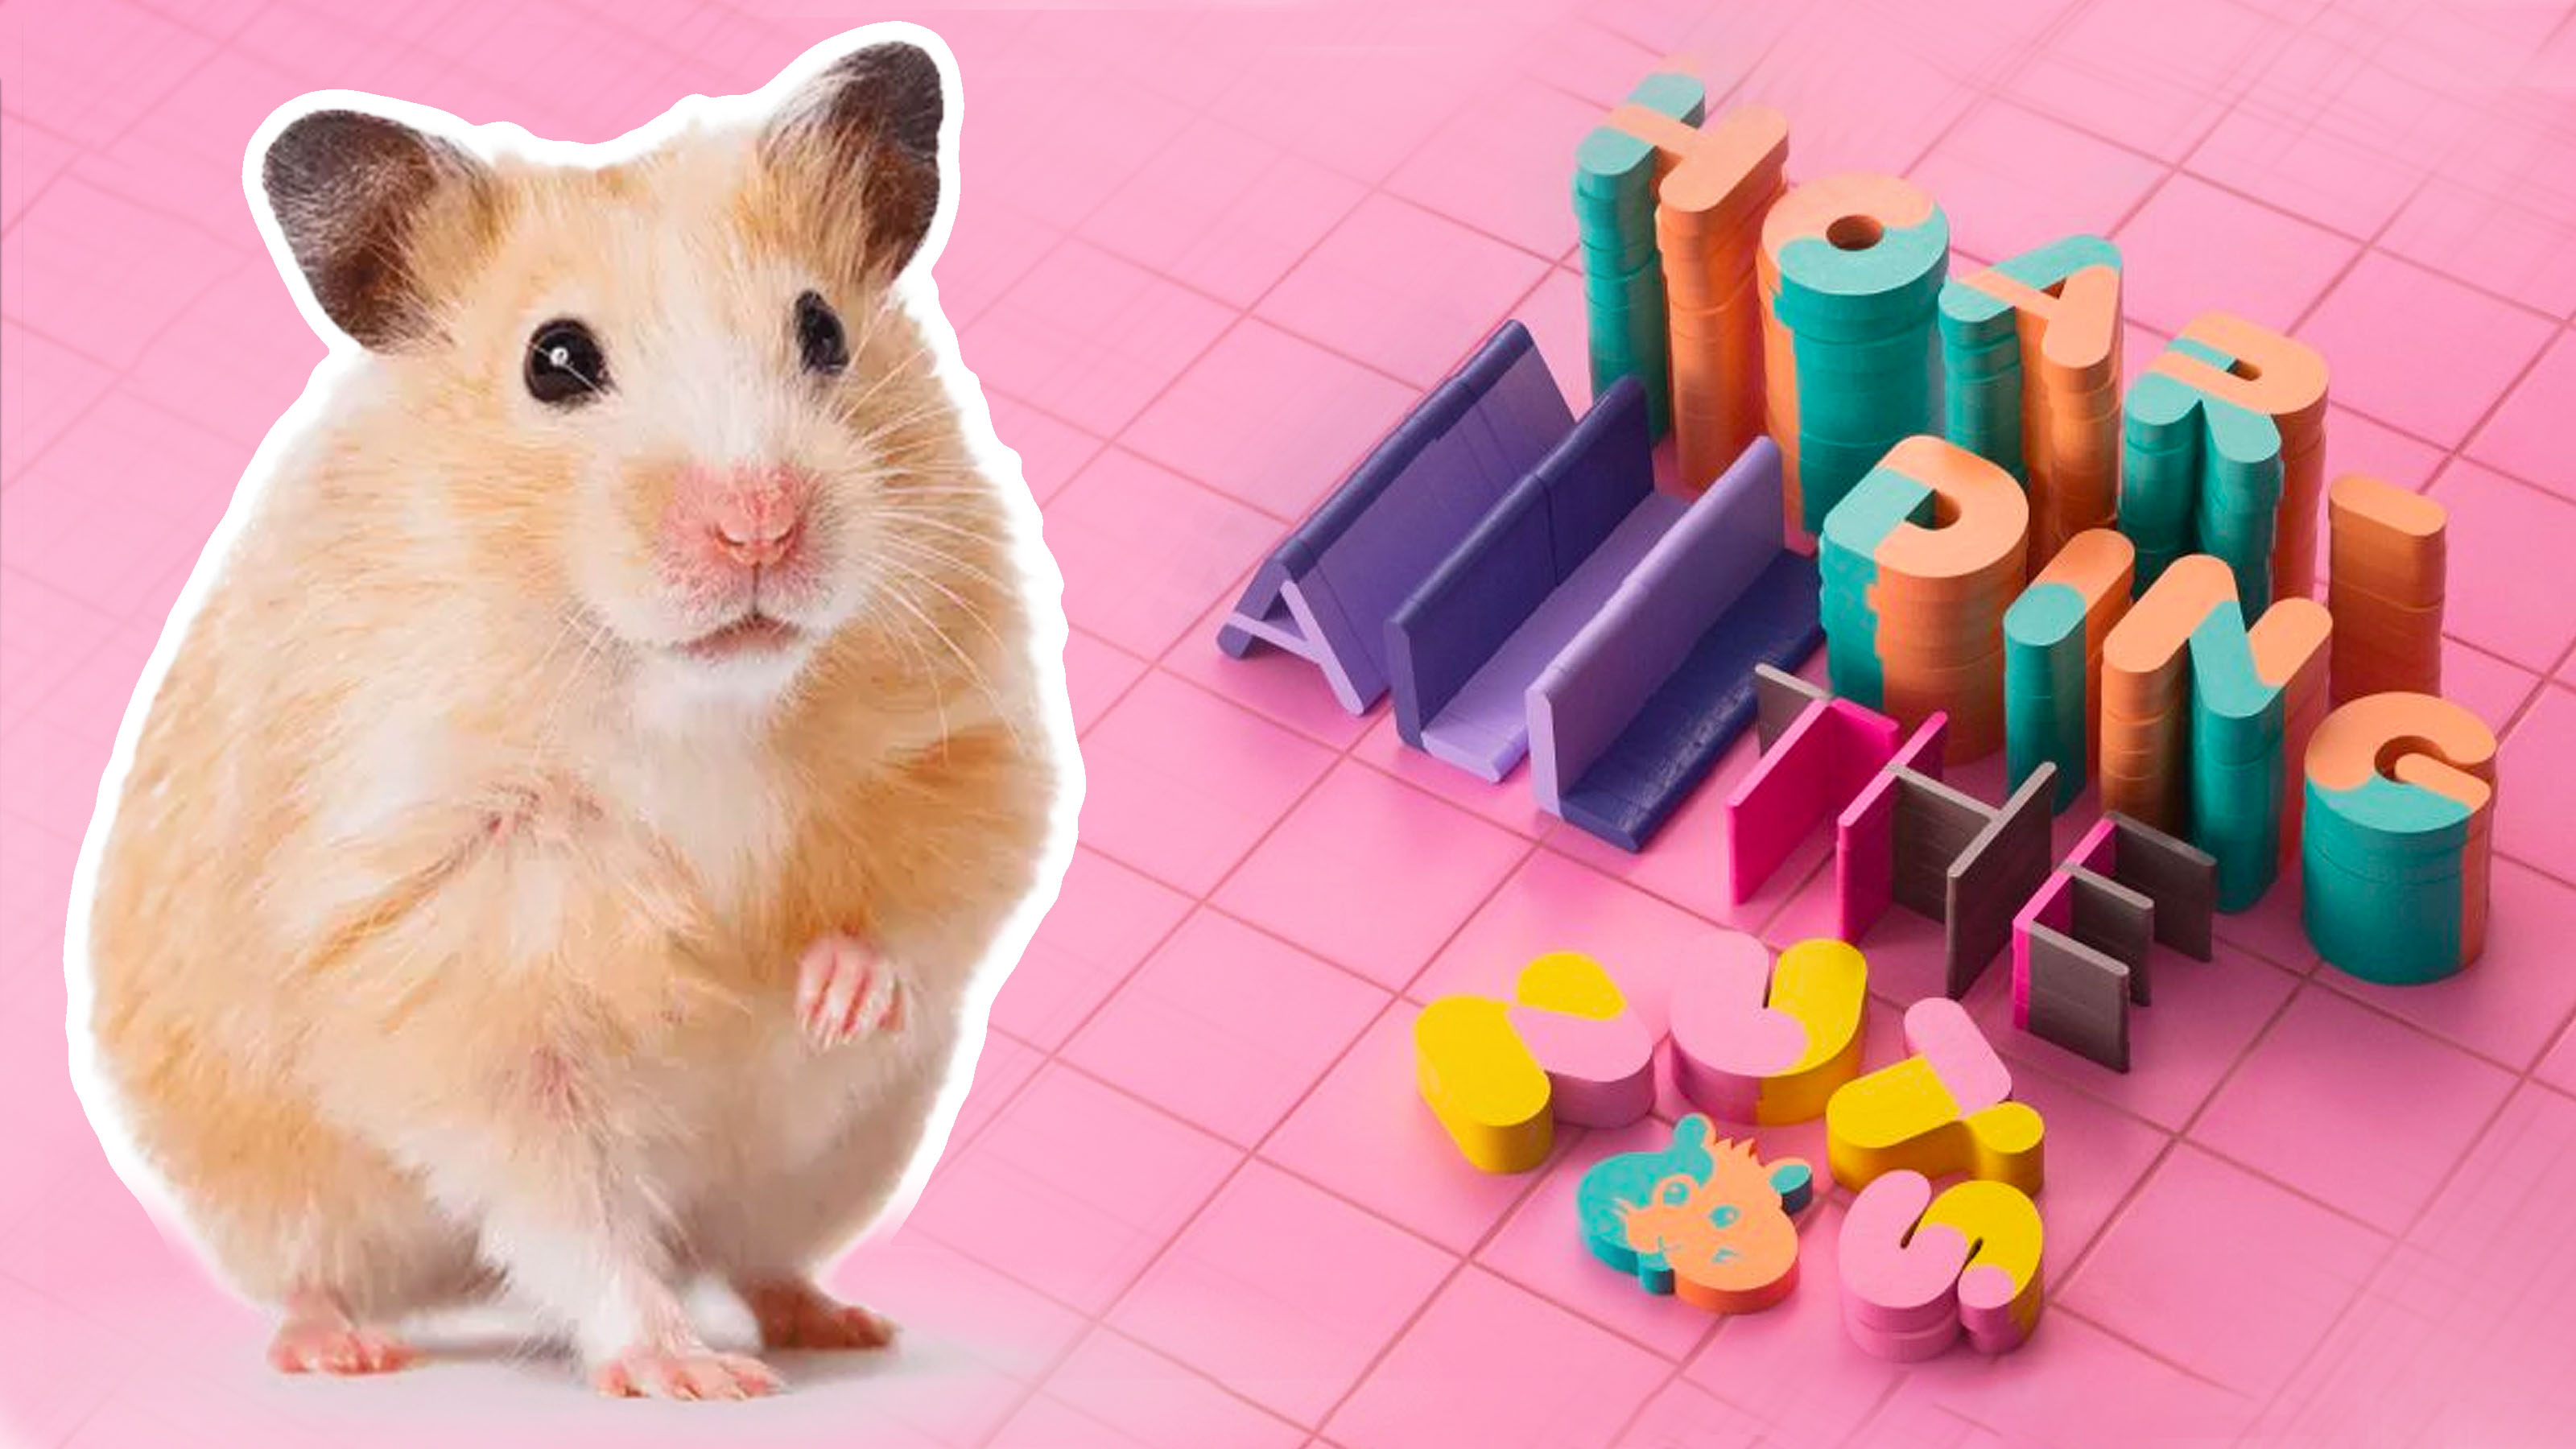 This typeface is inspired by your childhood hamster